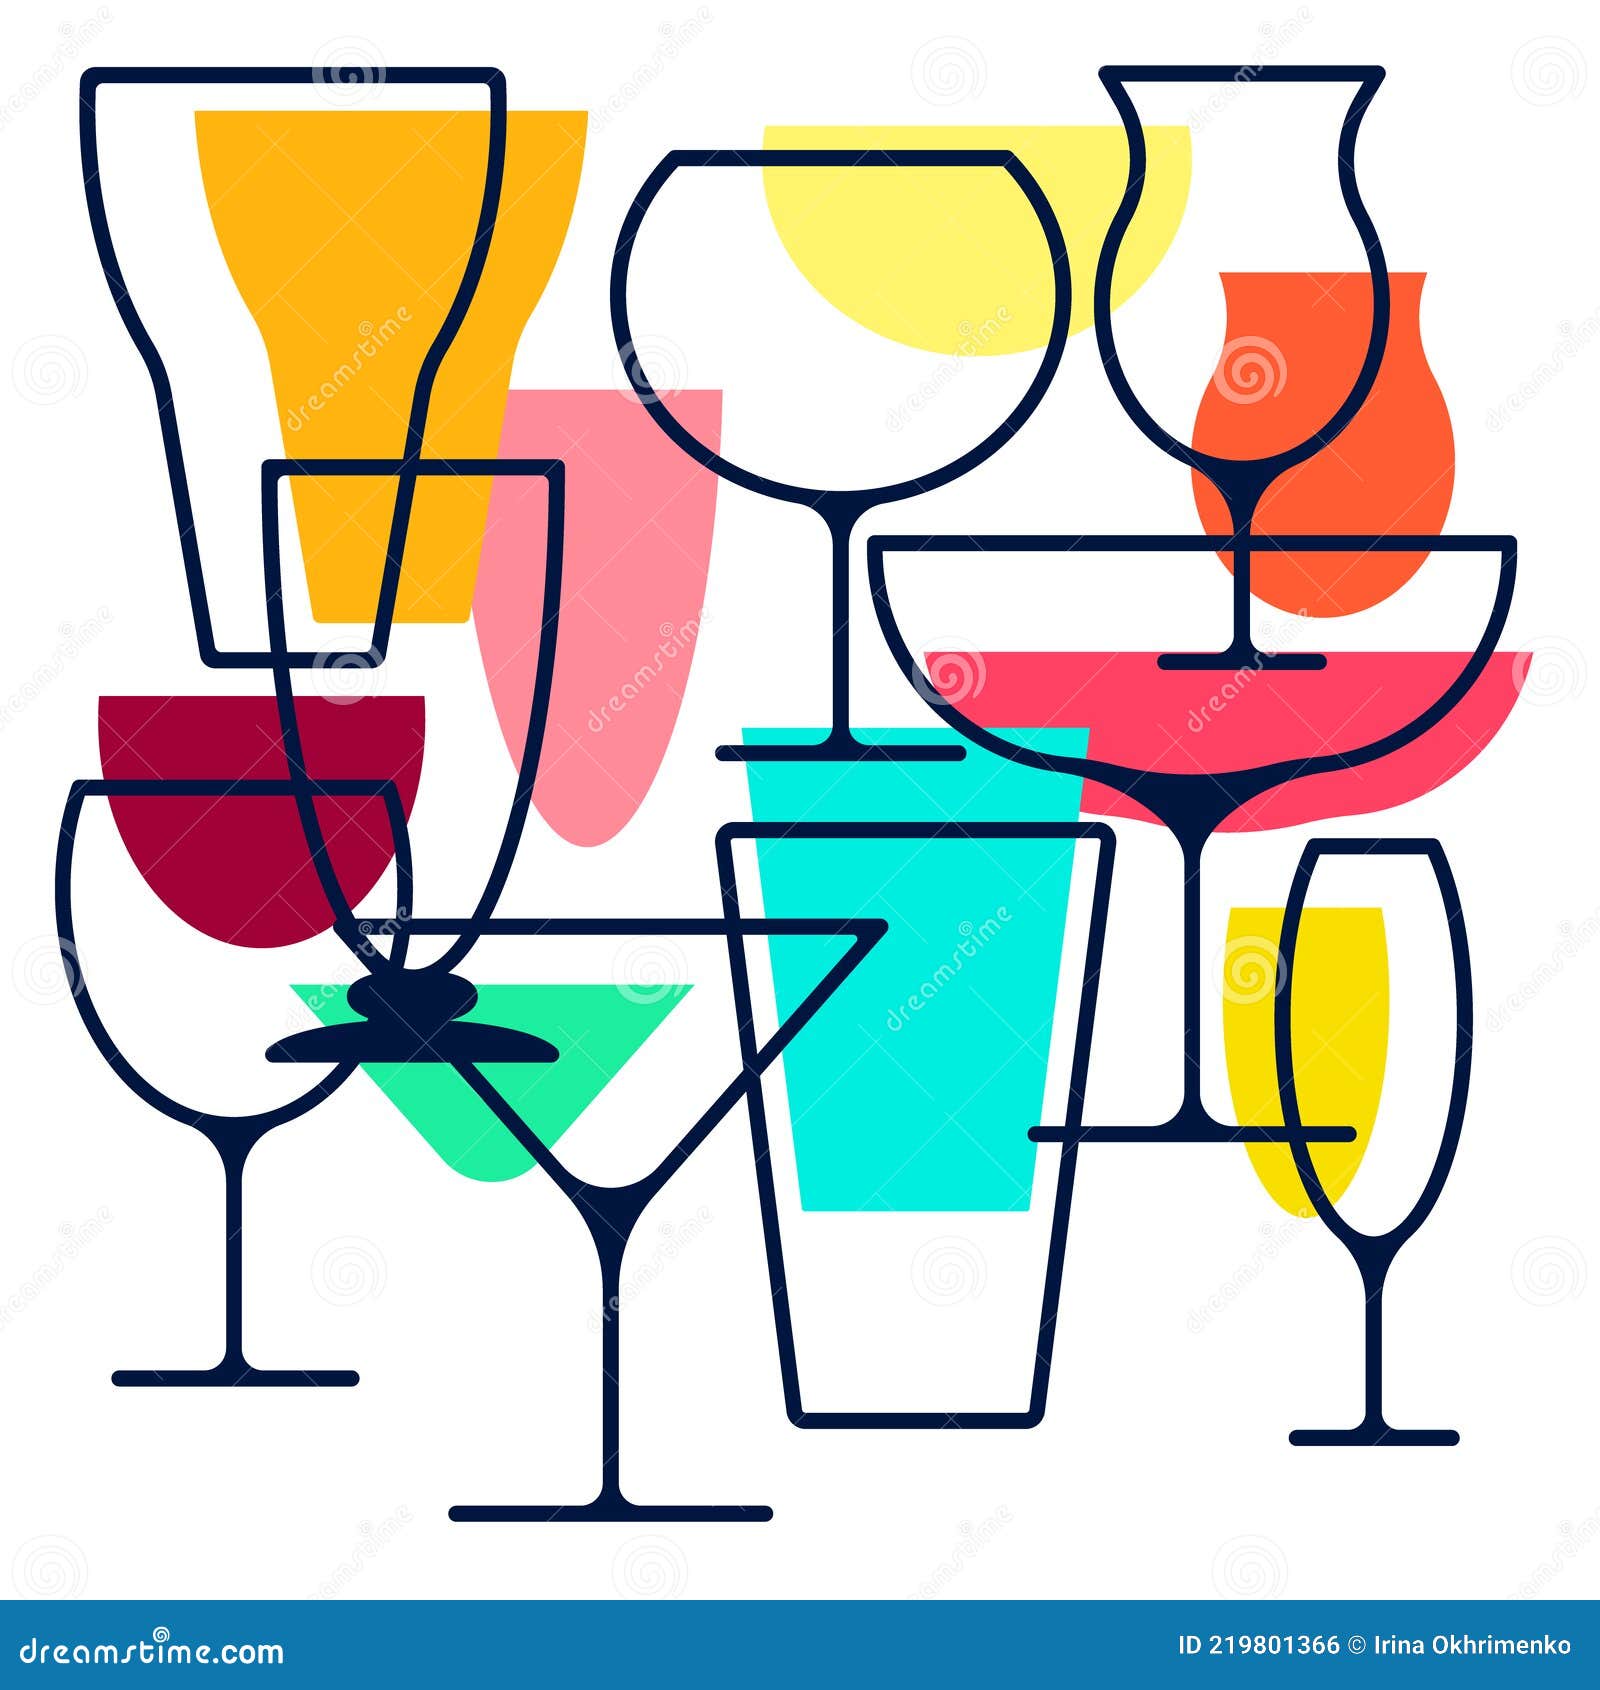 https://thumbs.dreamstime.com/z/drawing-alcohol-drinks-collection-set-glasses-colorful-abstract-illustration-bar-restaurant-cafe-night-club-219801366.jpg